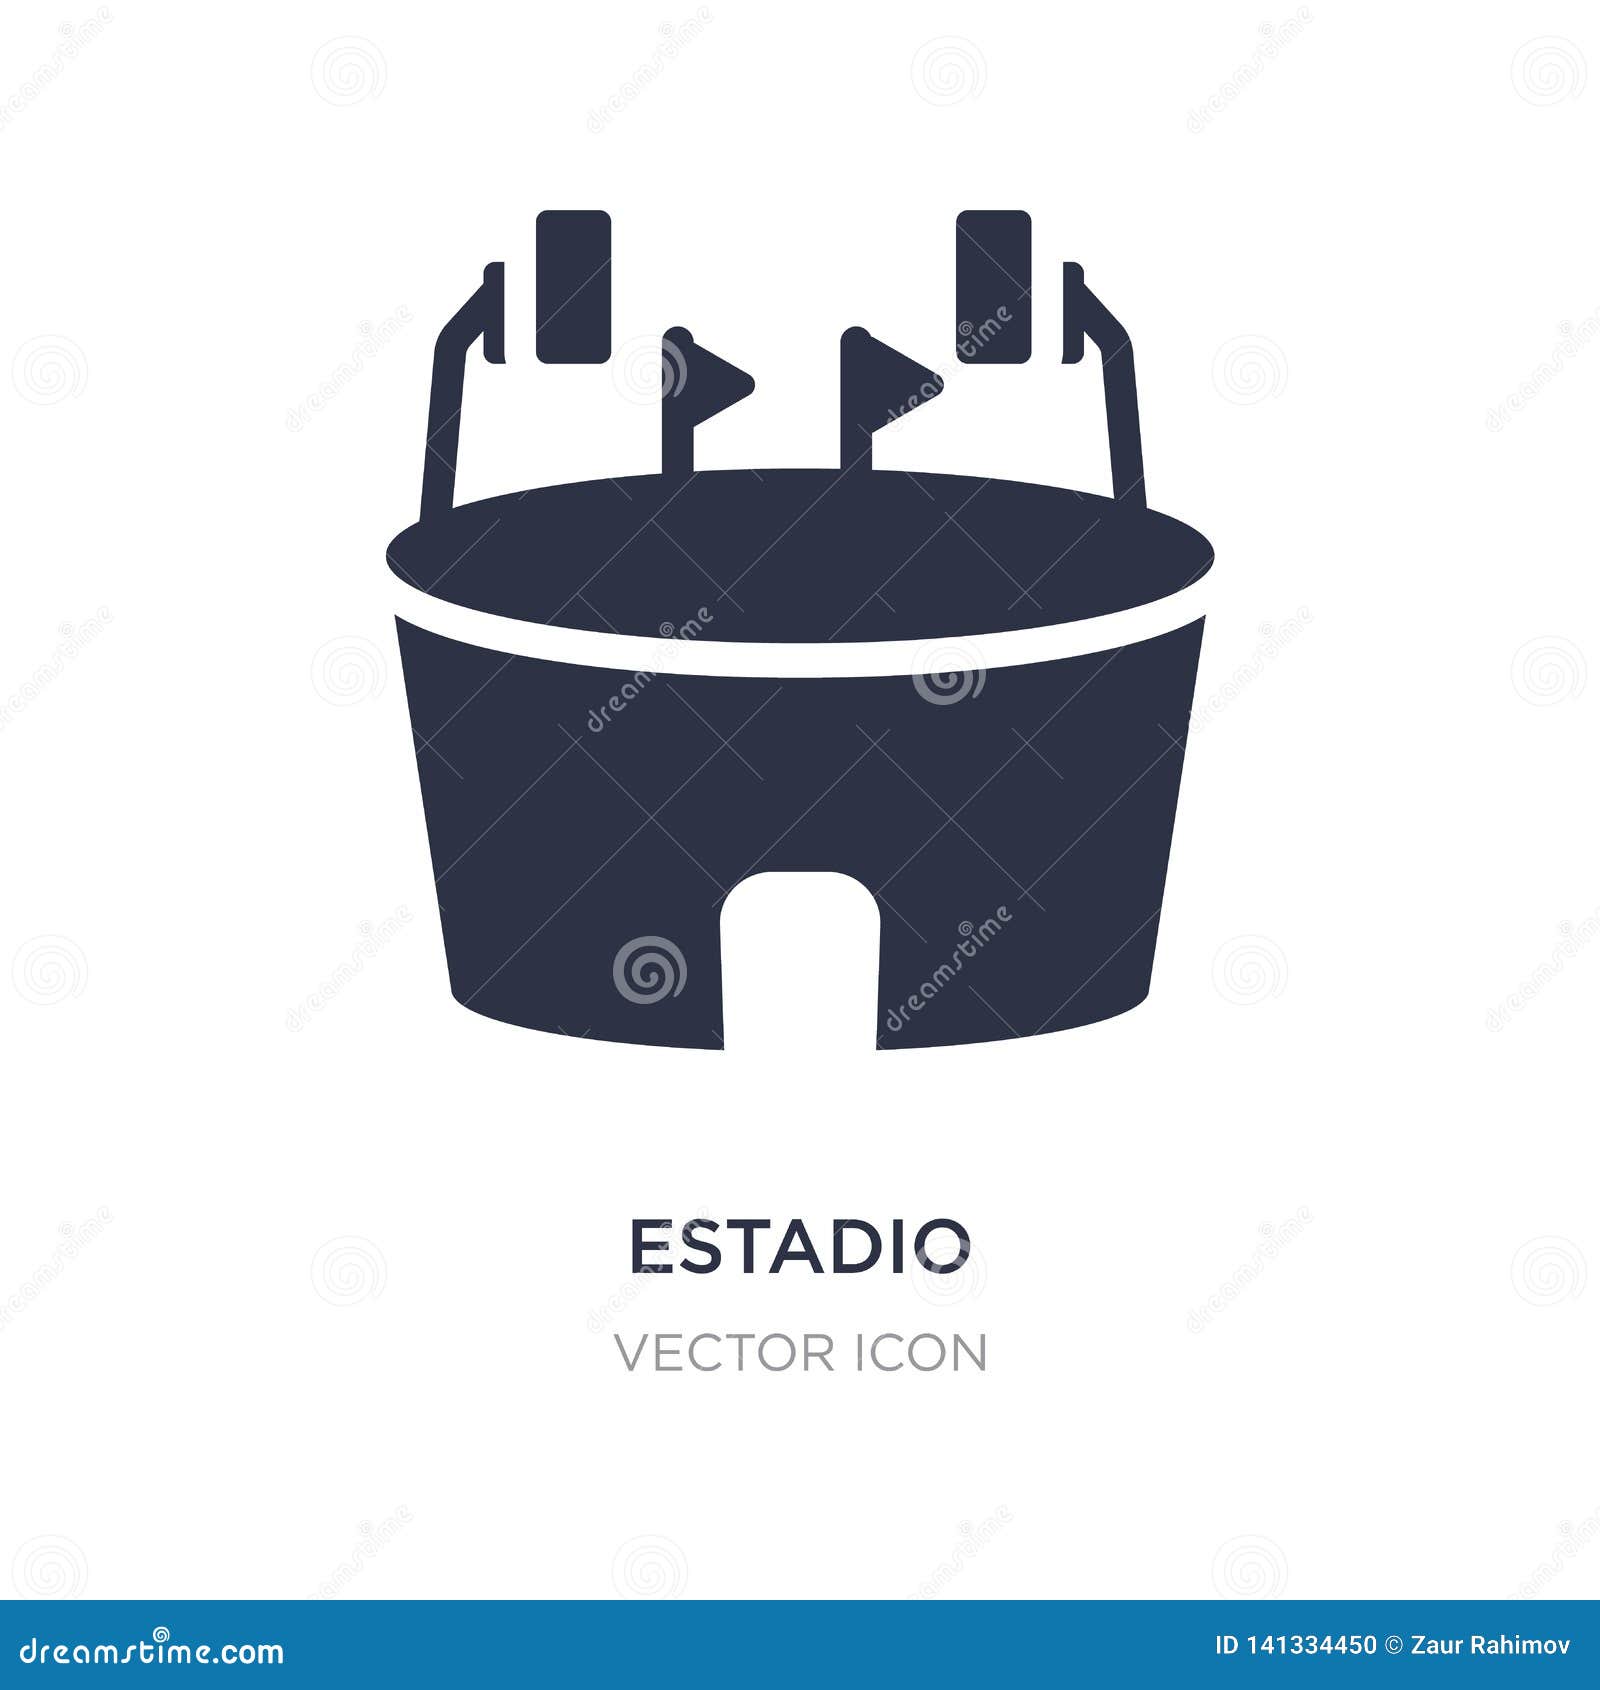 estadio icon on white background. simple   from sports concept